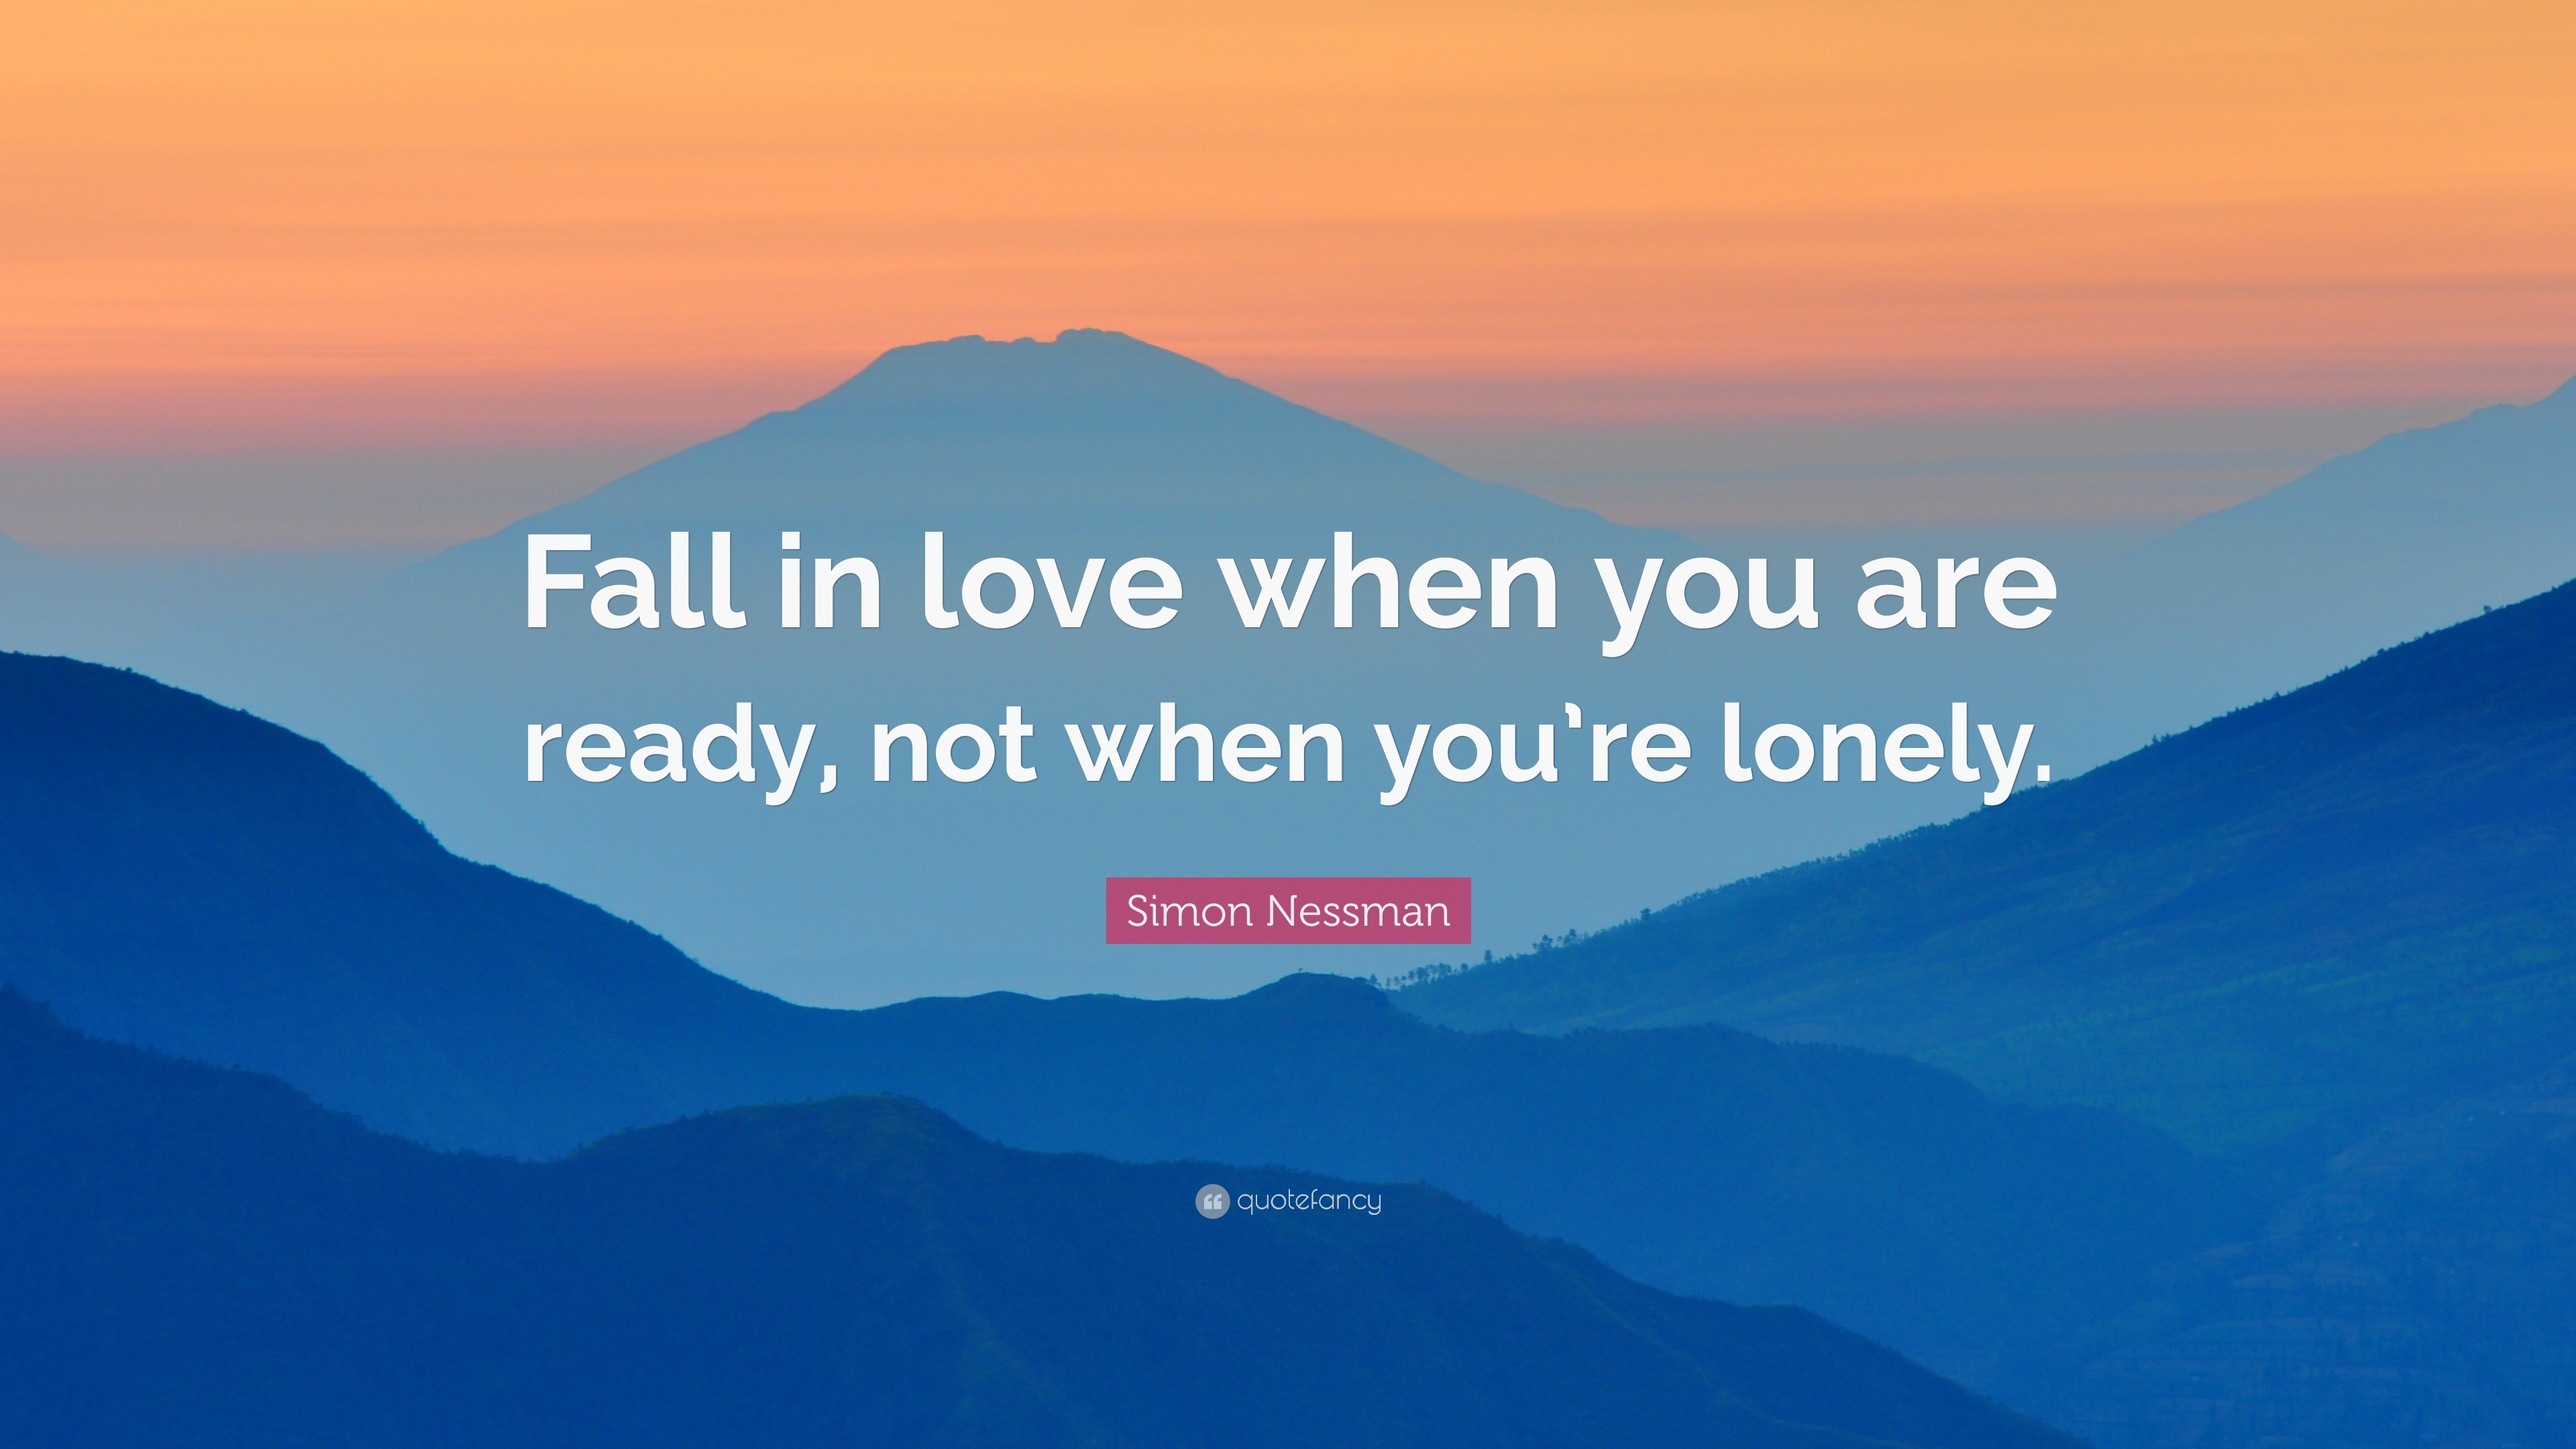 Simon Nessman Quote “Fall in love when you are ready not when you